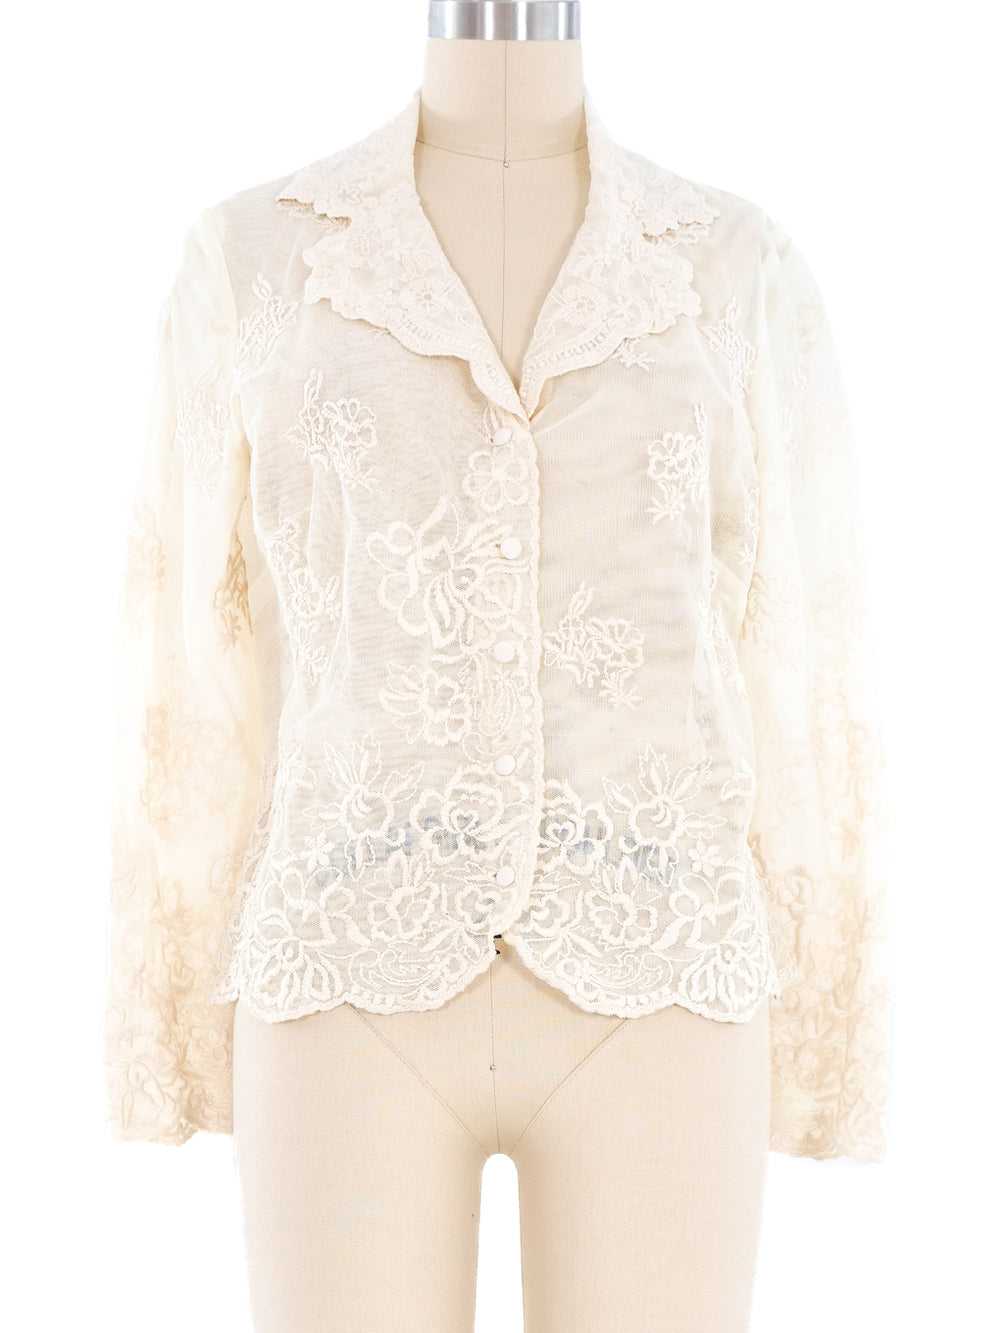 Ivory Floral Lace Blouse - image 1